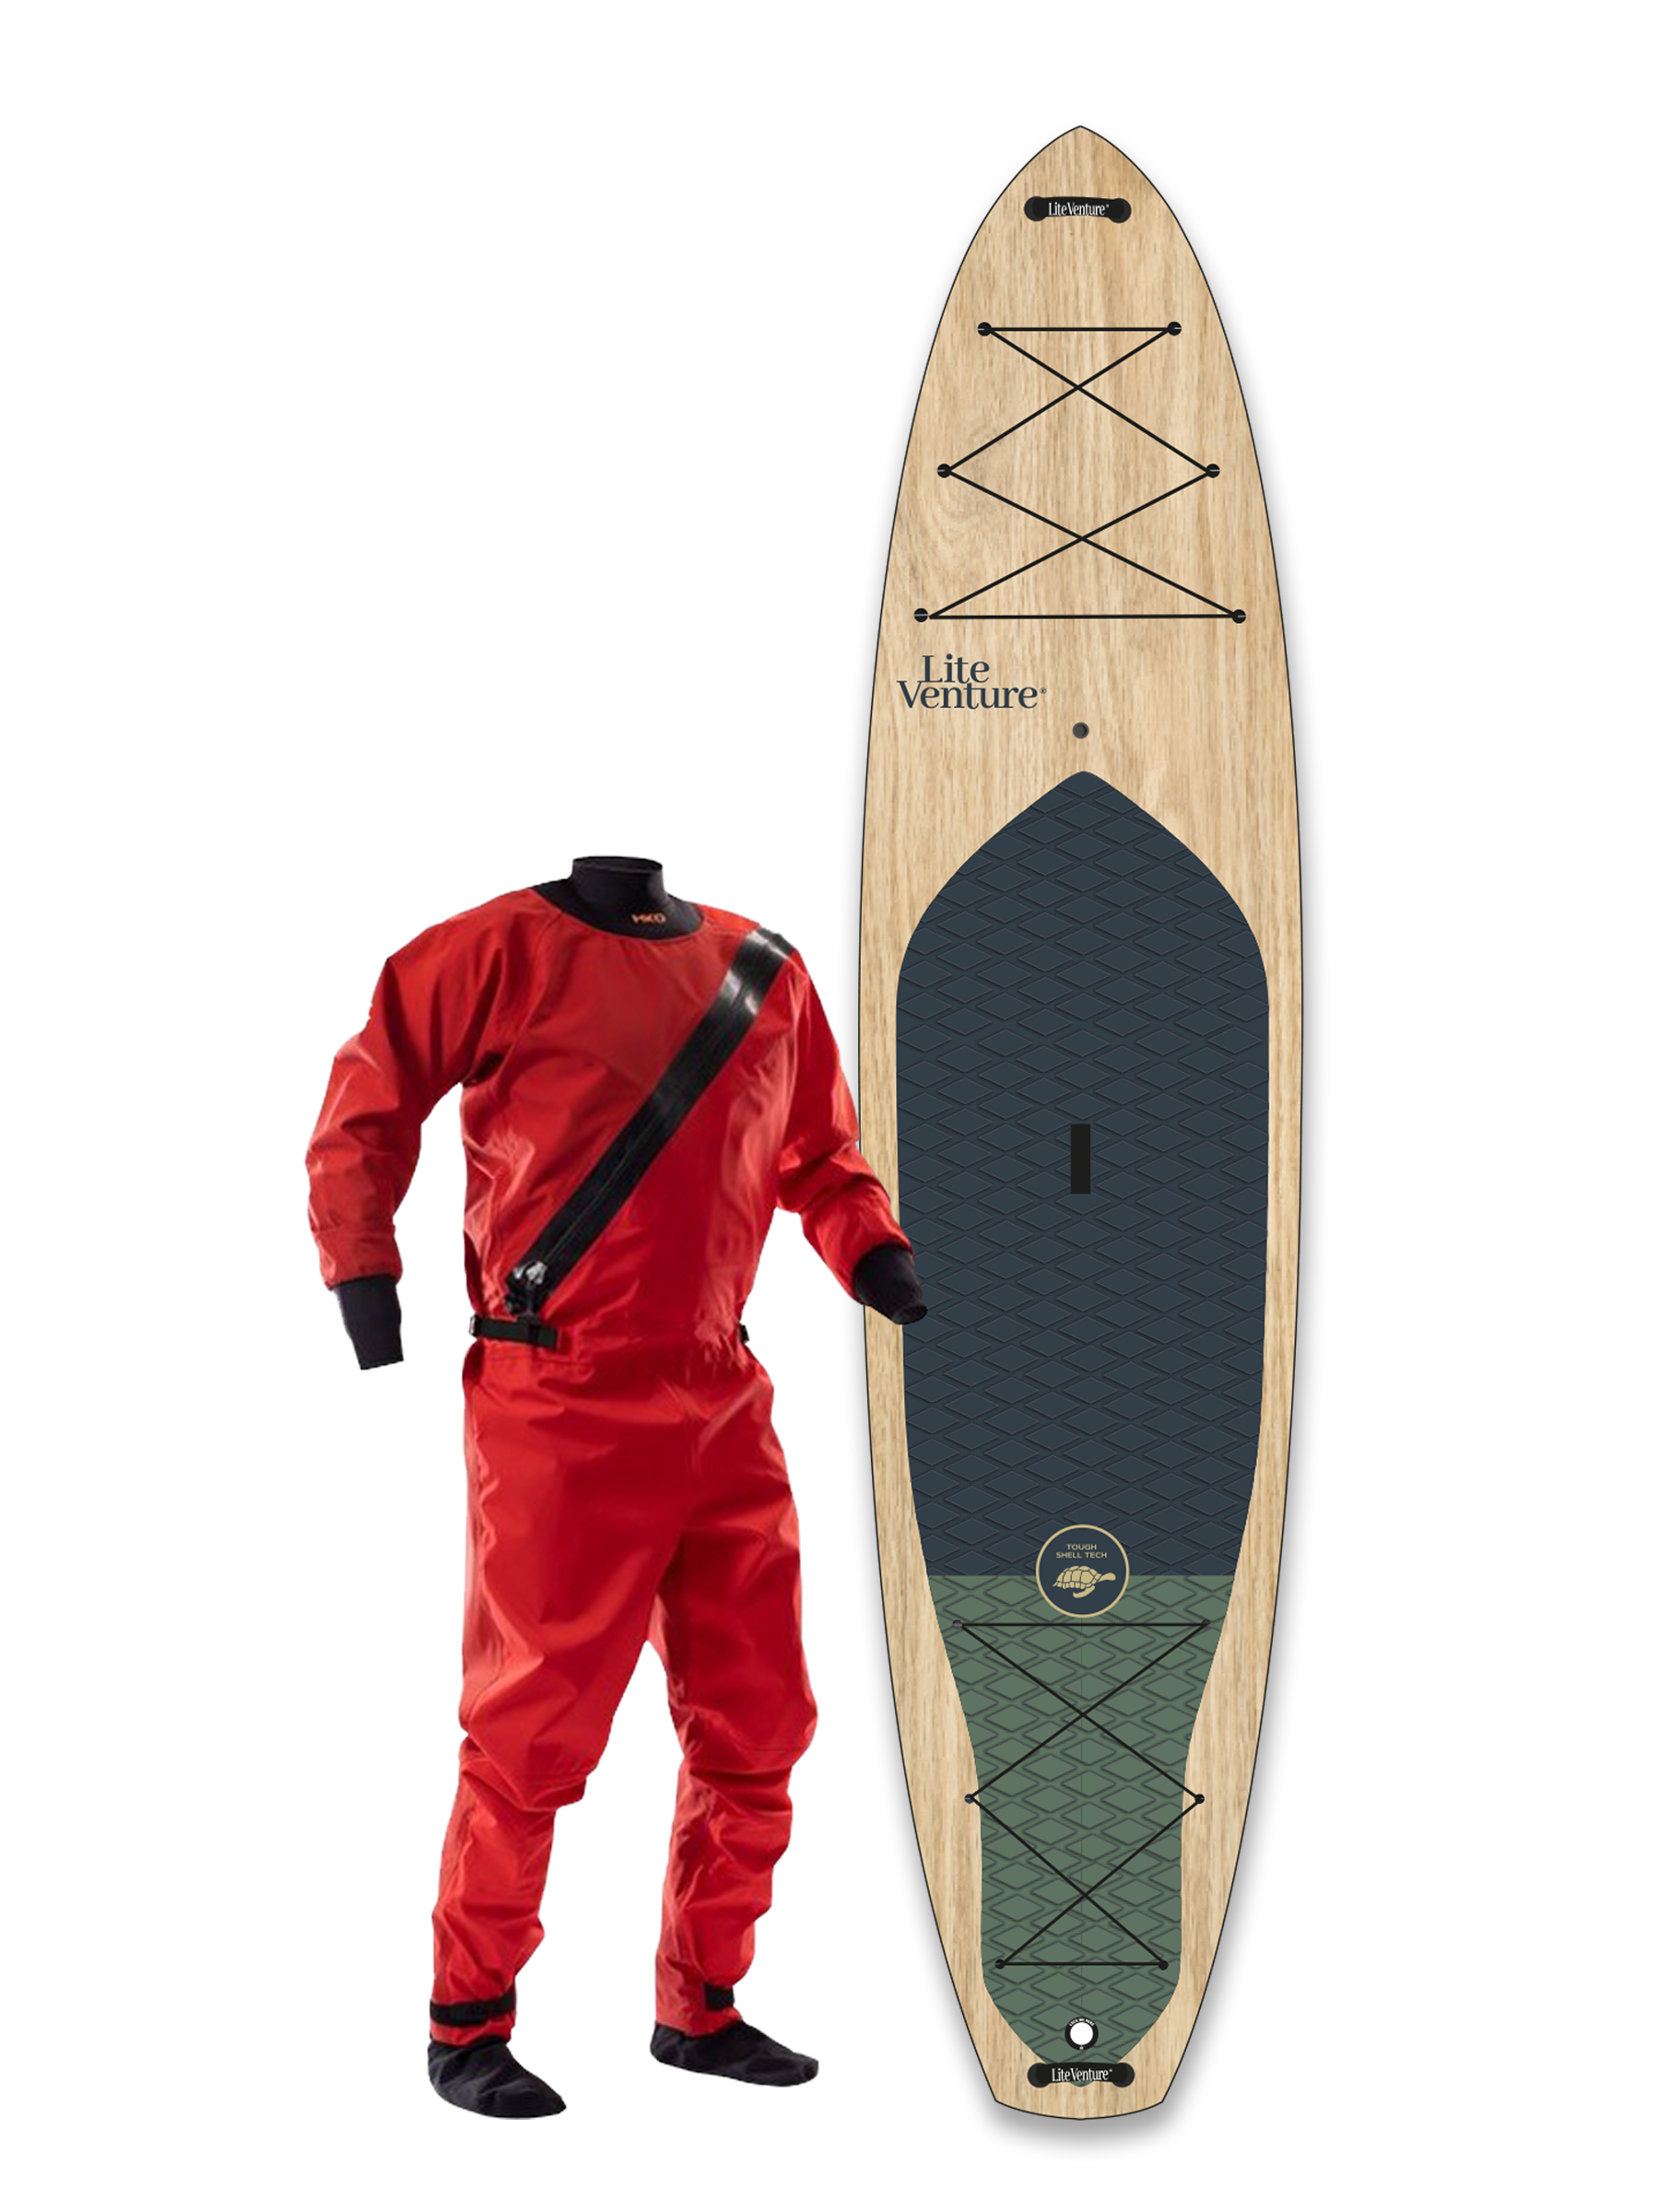 Tough Shell Touring-12'0" x 32"-wood winter deal includes drysuit